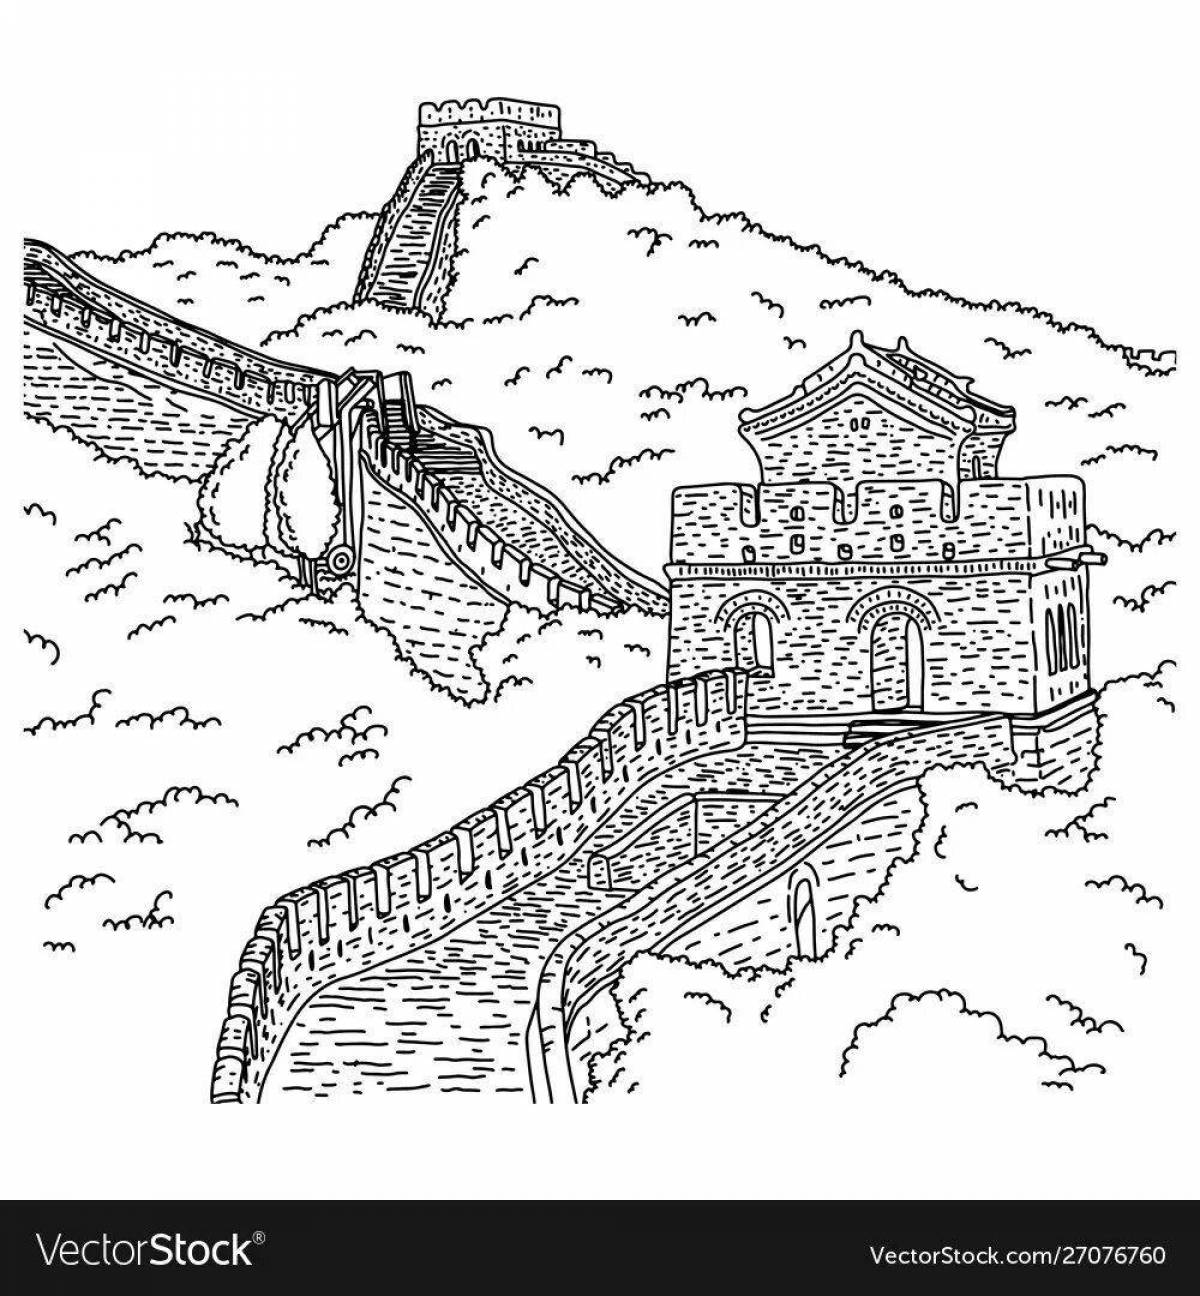 Great great wall of china coloring book